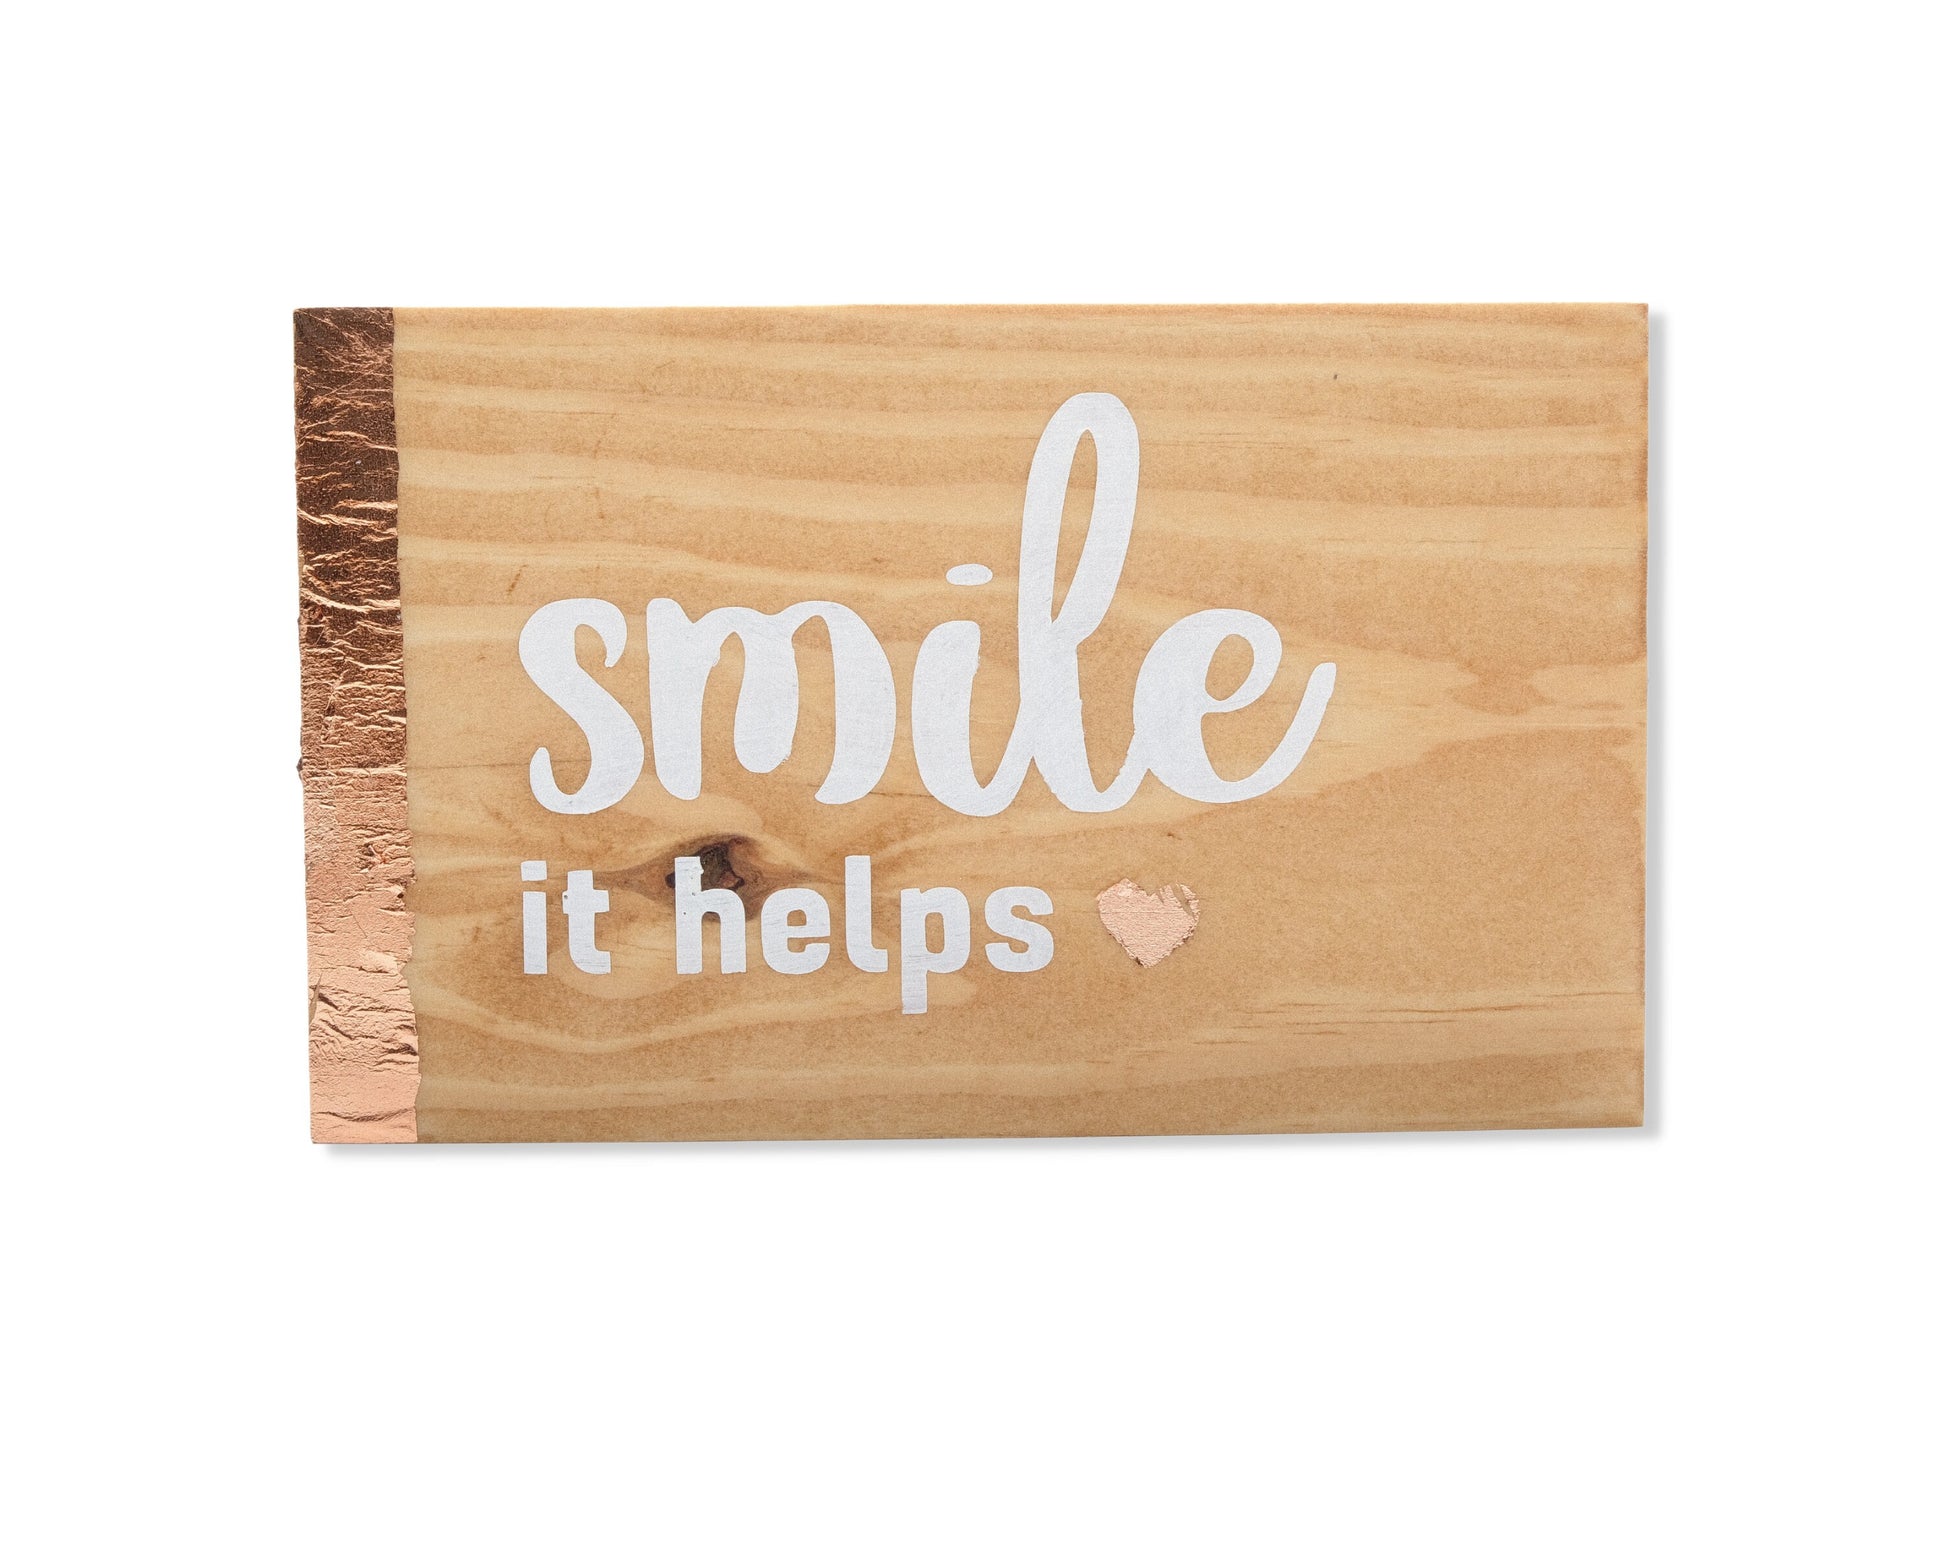 Small freestanding rectangular wooden sign facing straight on. Natural wood color, bronze rose gold vertical border on left side. White painted message, smile it helps. Small solid heart in bronze rose gold. Studio style photo with white background.